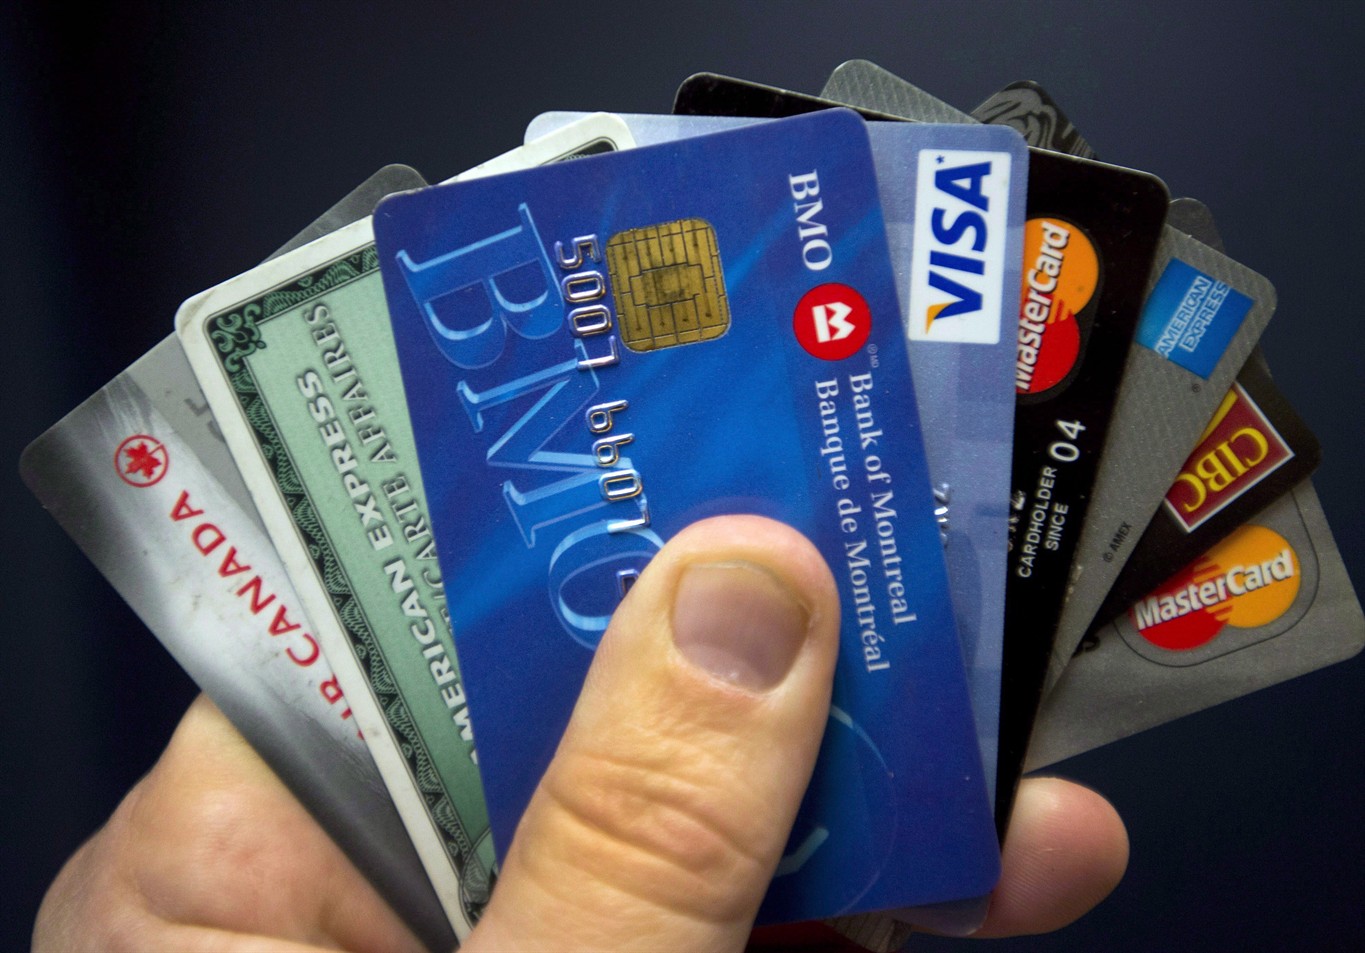 debit-and-credit-cards-collect-more-bacteria-than-cash-study-says